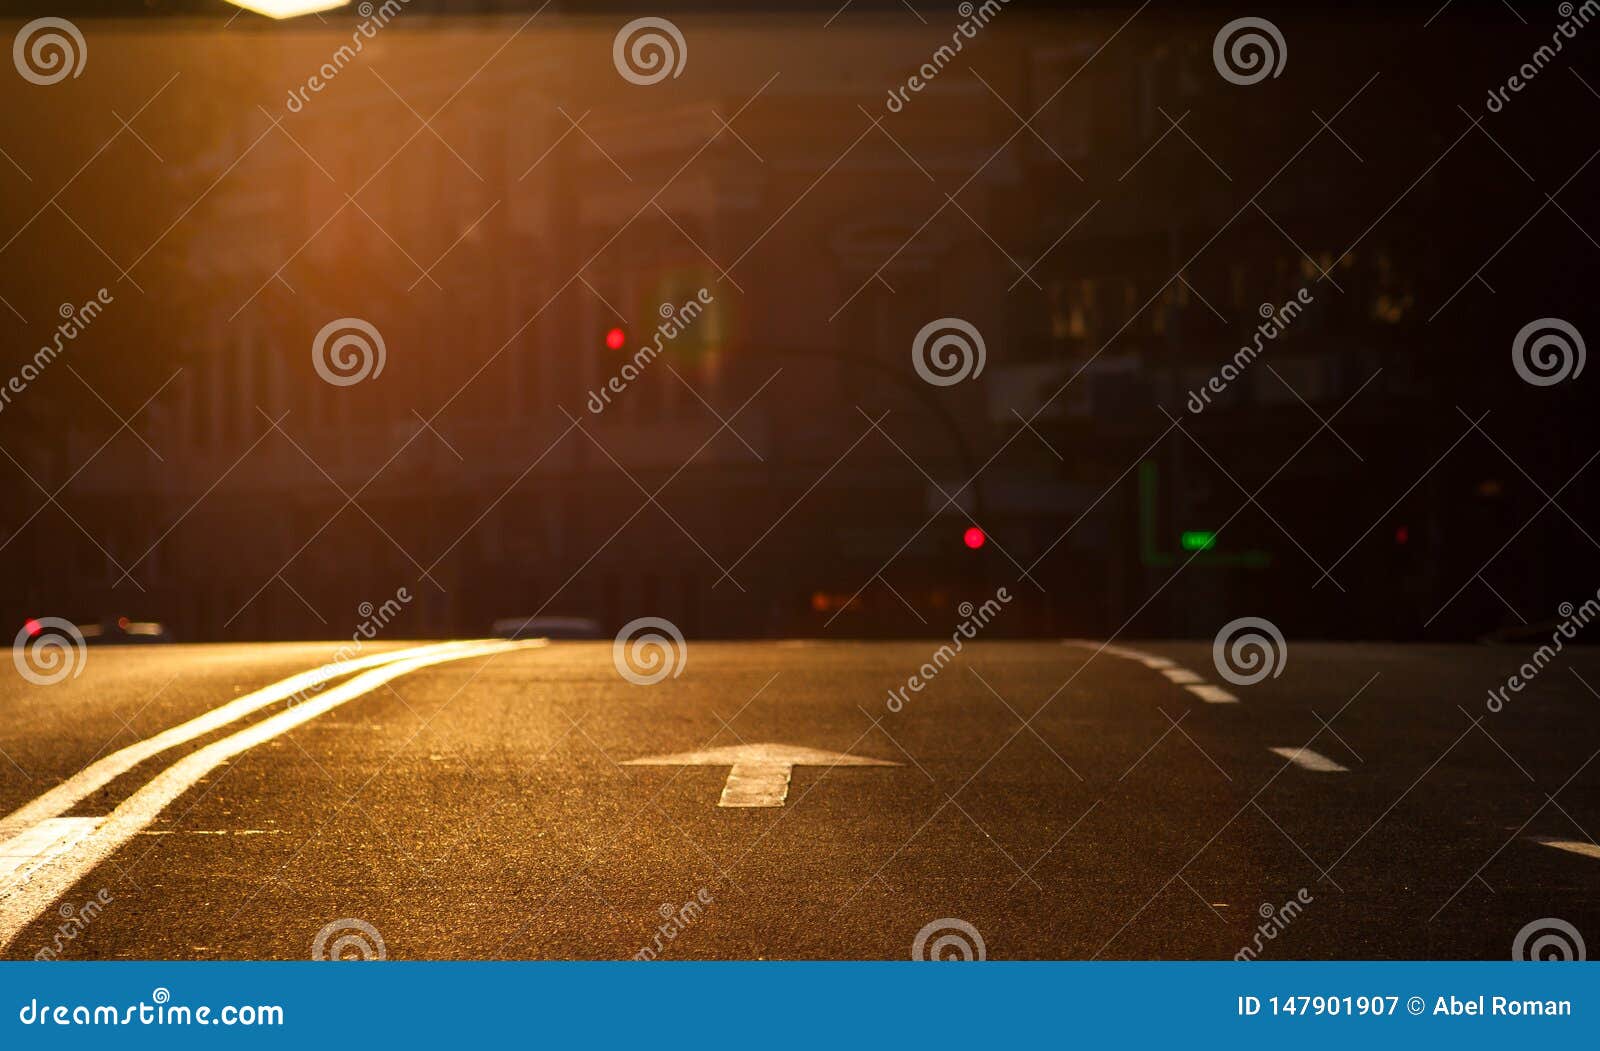 sunset in the city. arrow signaling of vehicles in an urban environment with traffic lights and a change of grade